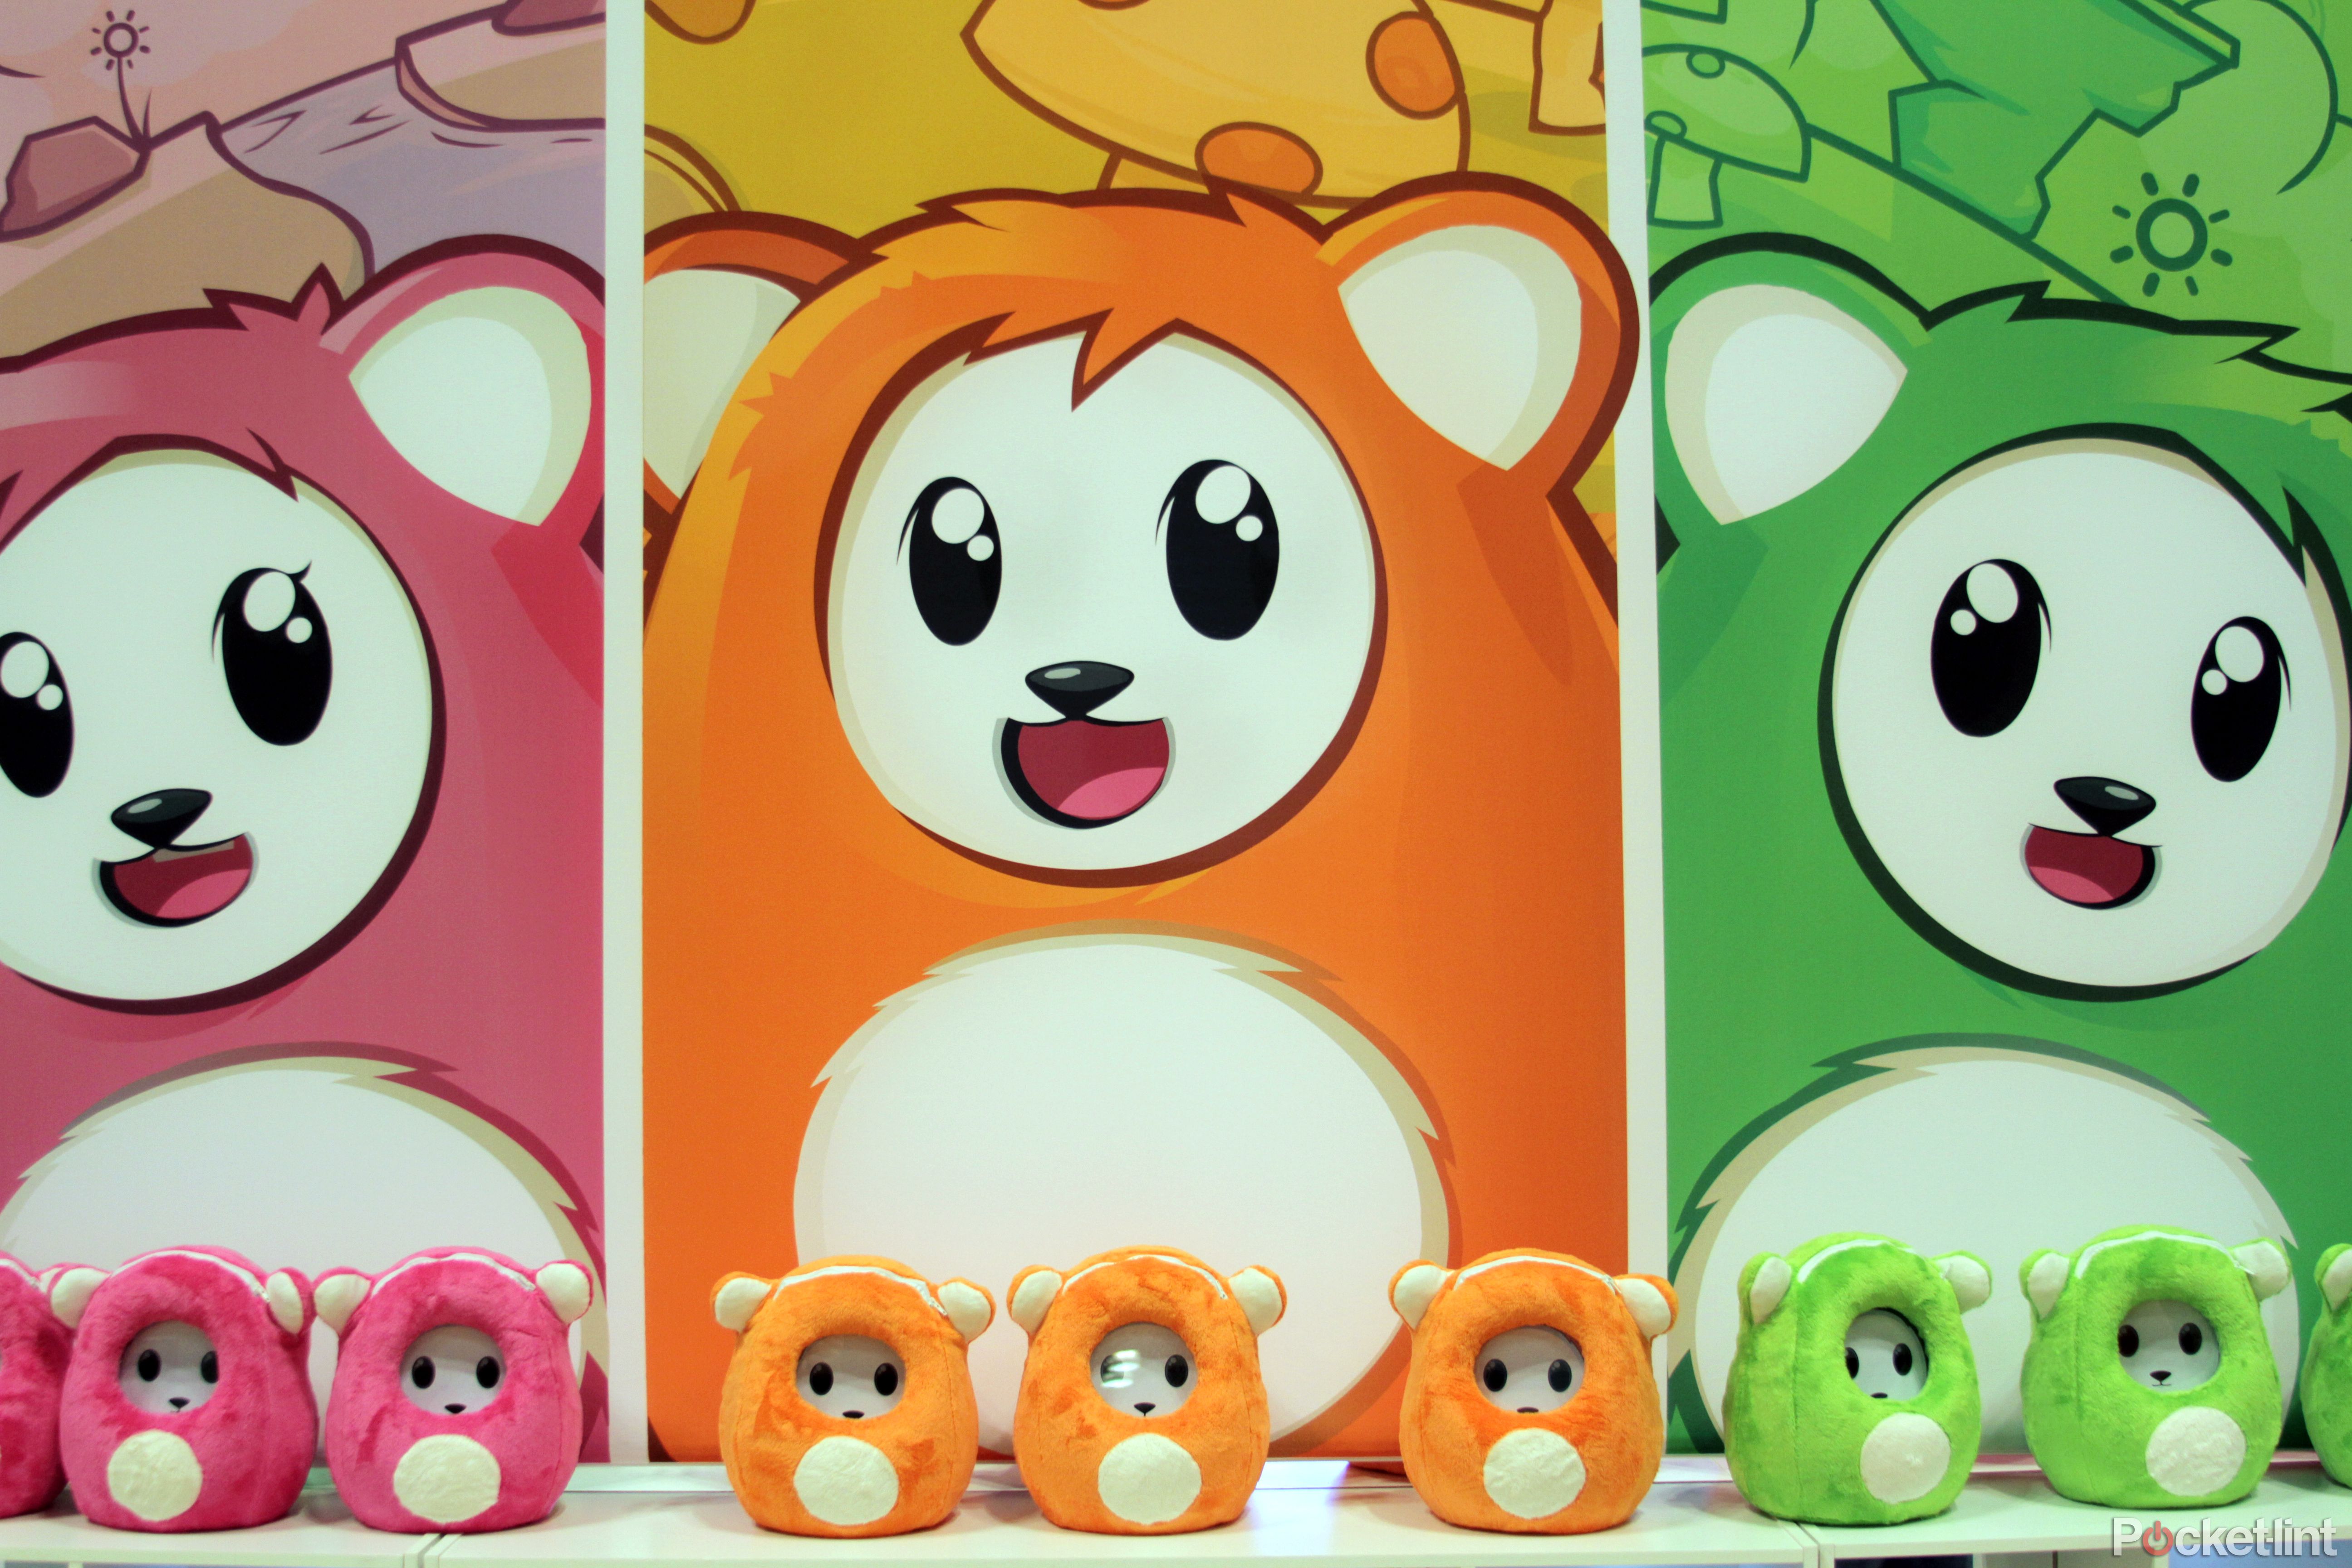 hands on ubooly plush toy and interactive app for mobile devices review image 1